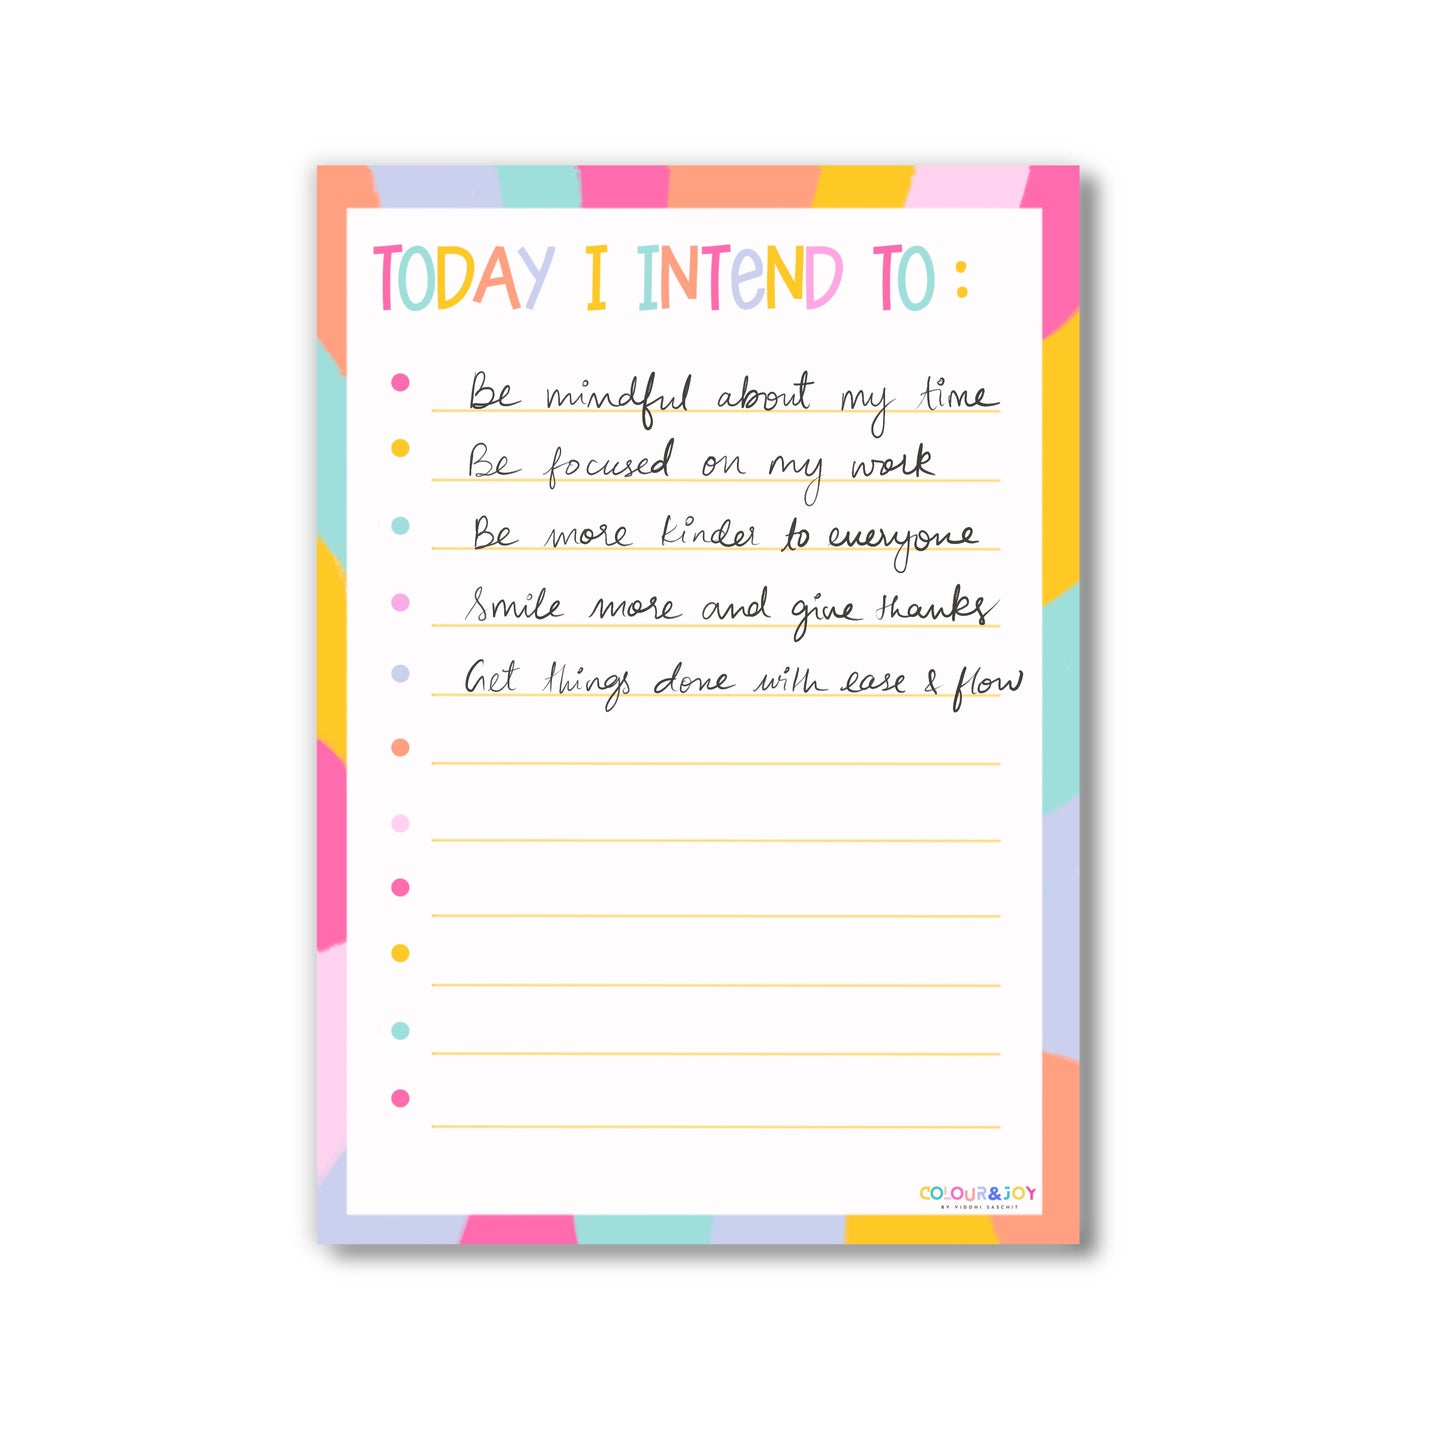 Daily Intention Setting Planner - A4 (8.3"x11.7")